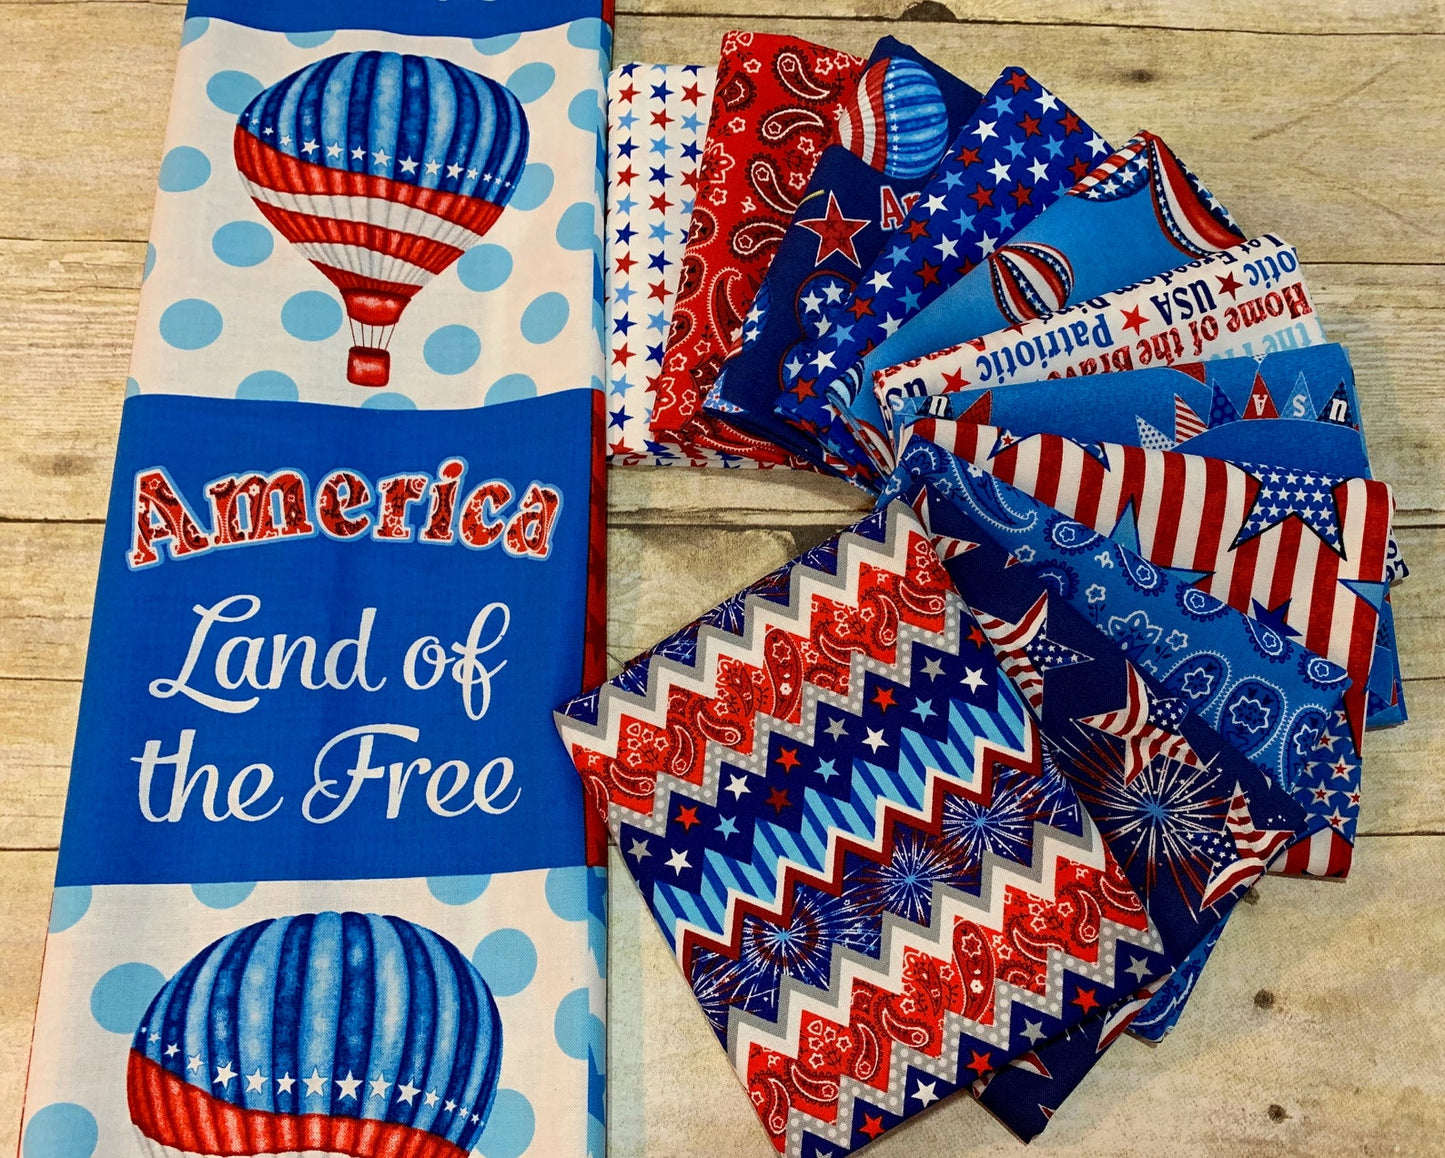 America Home of the Brave by Sharla Fults Small Blue Stars 4630-78 Cotton Woven Fabric